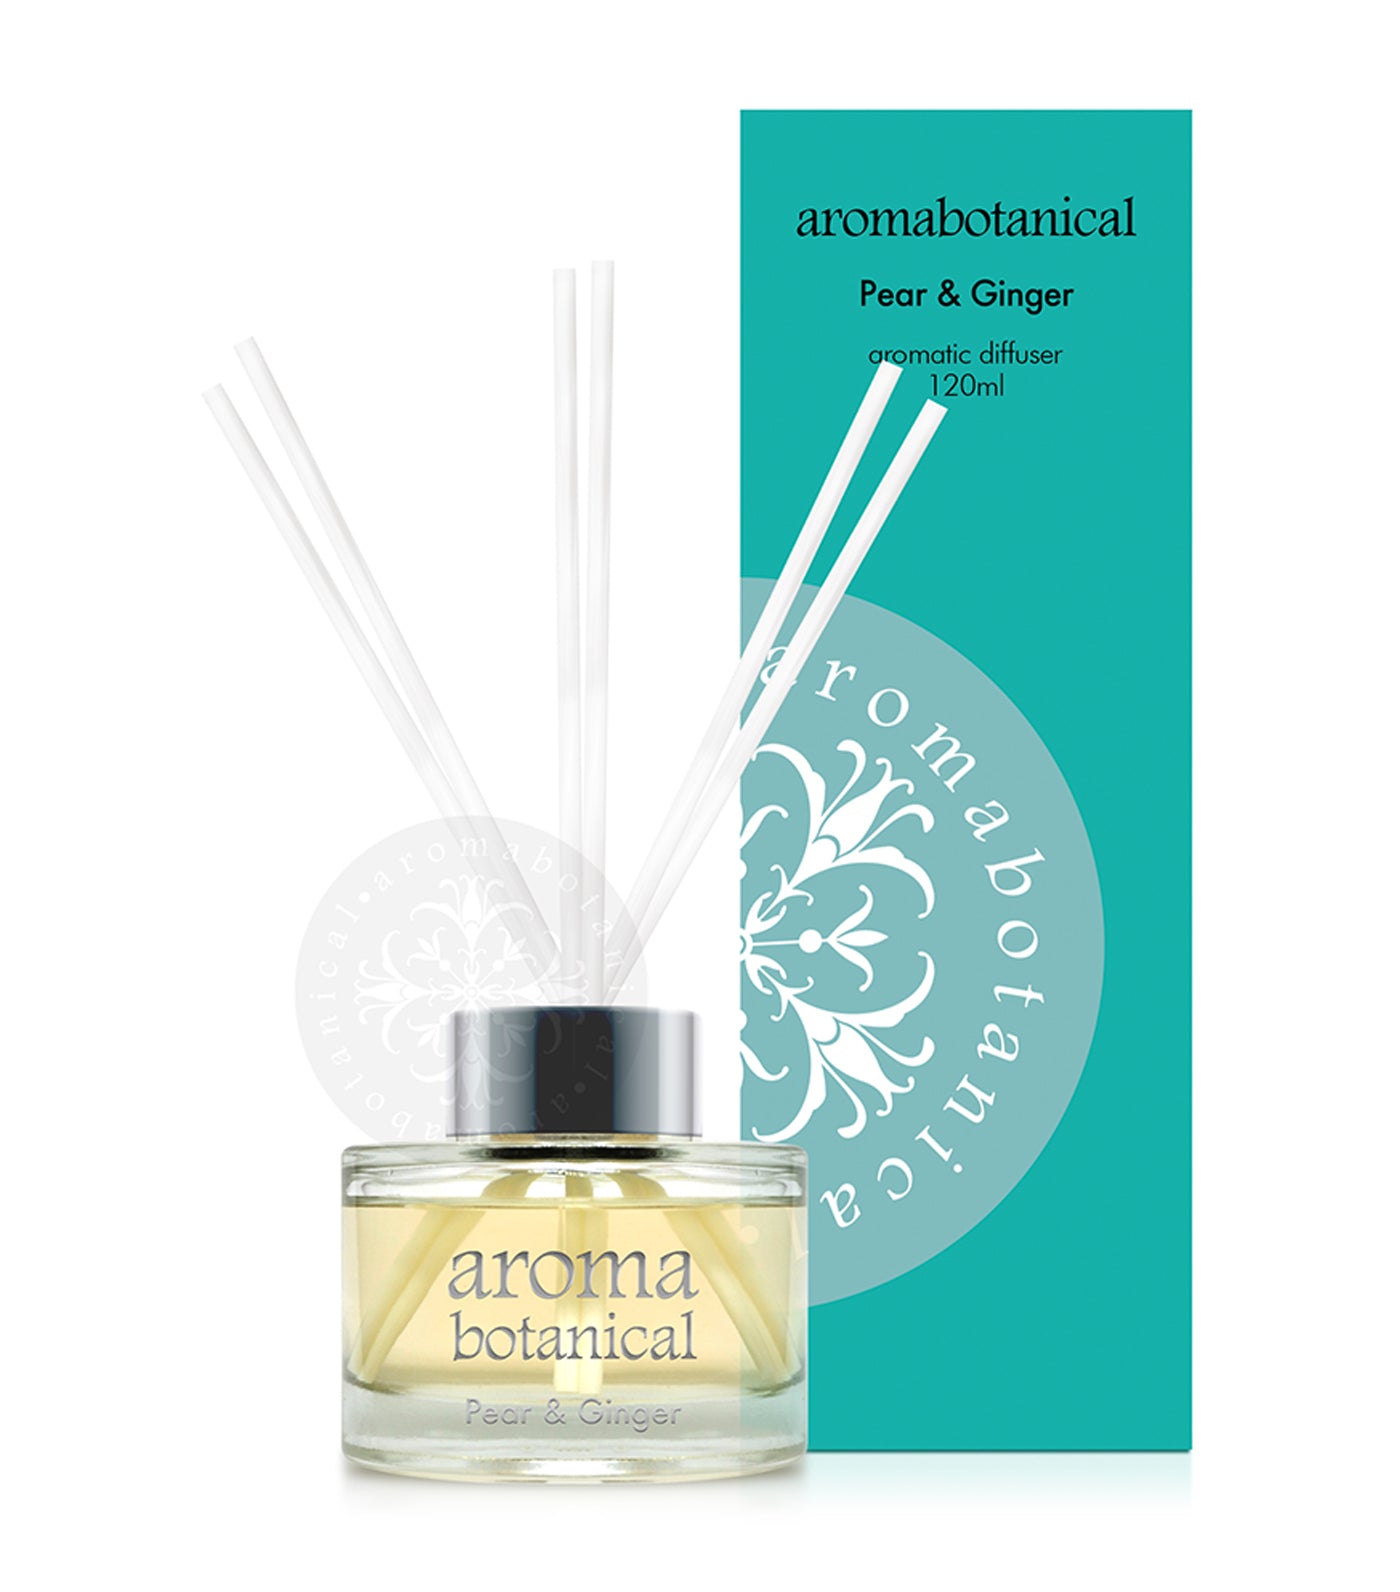 aromabotanical pear & ginger 120ml reed diffuser